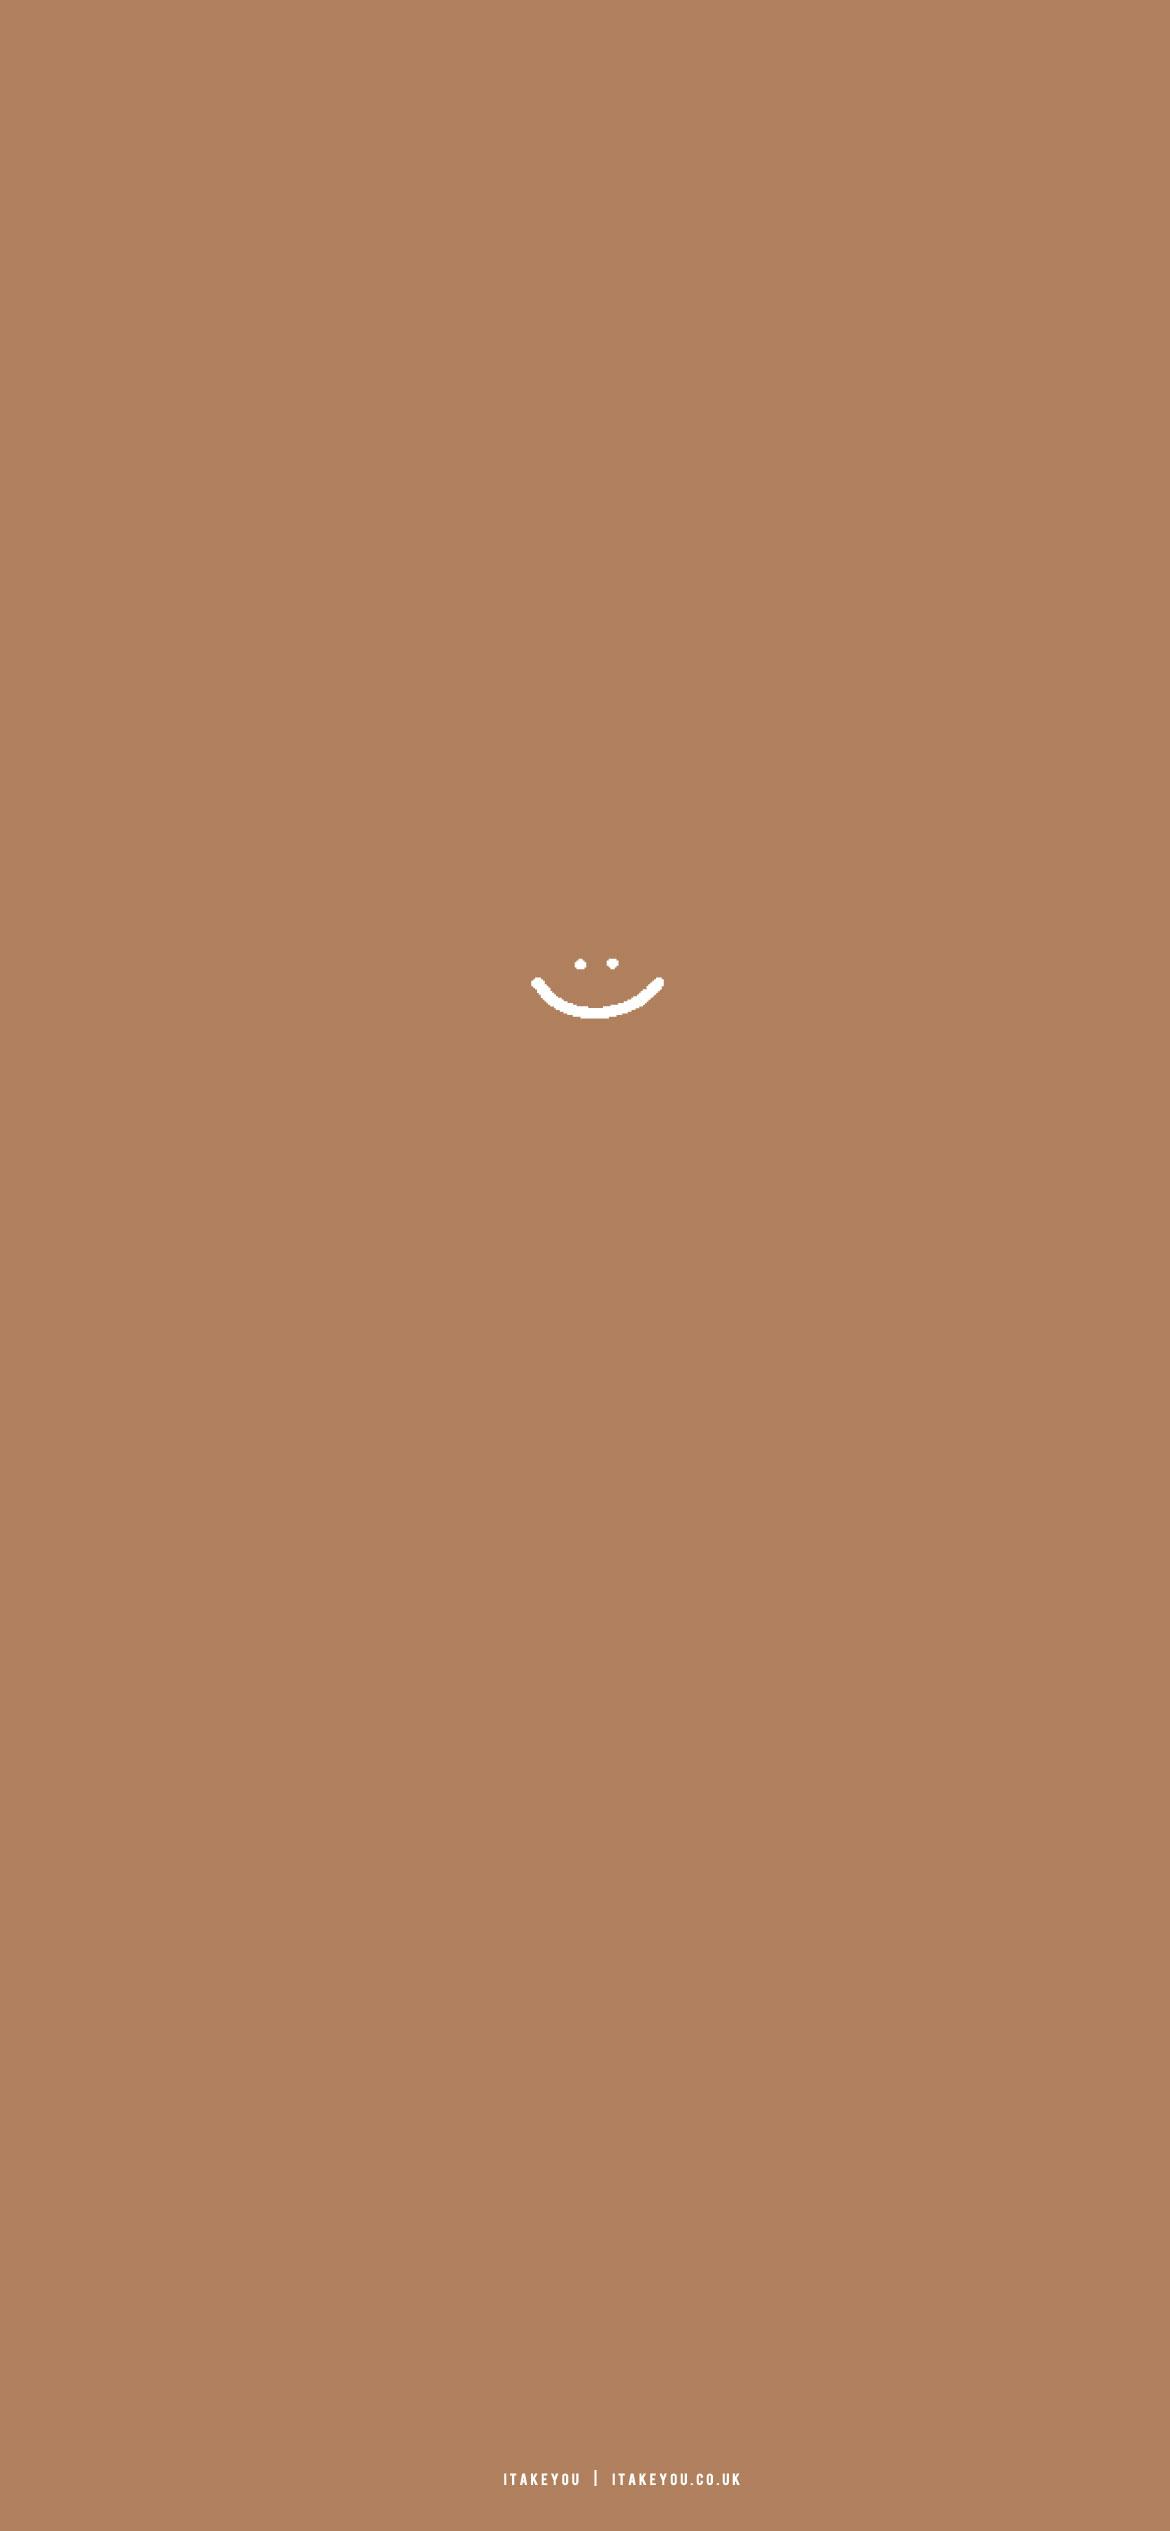 Minimalist Brown Wallpaper iPhone Ideas For Smile I